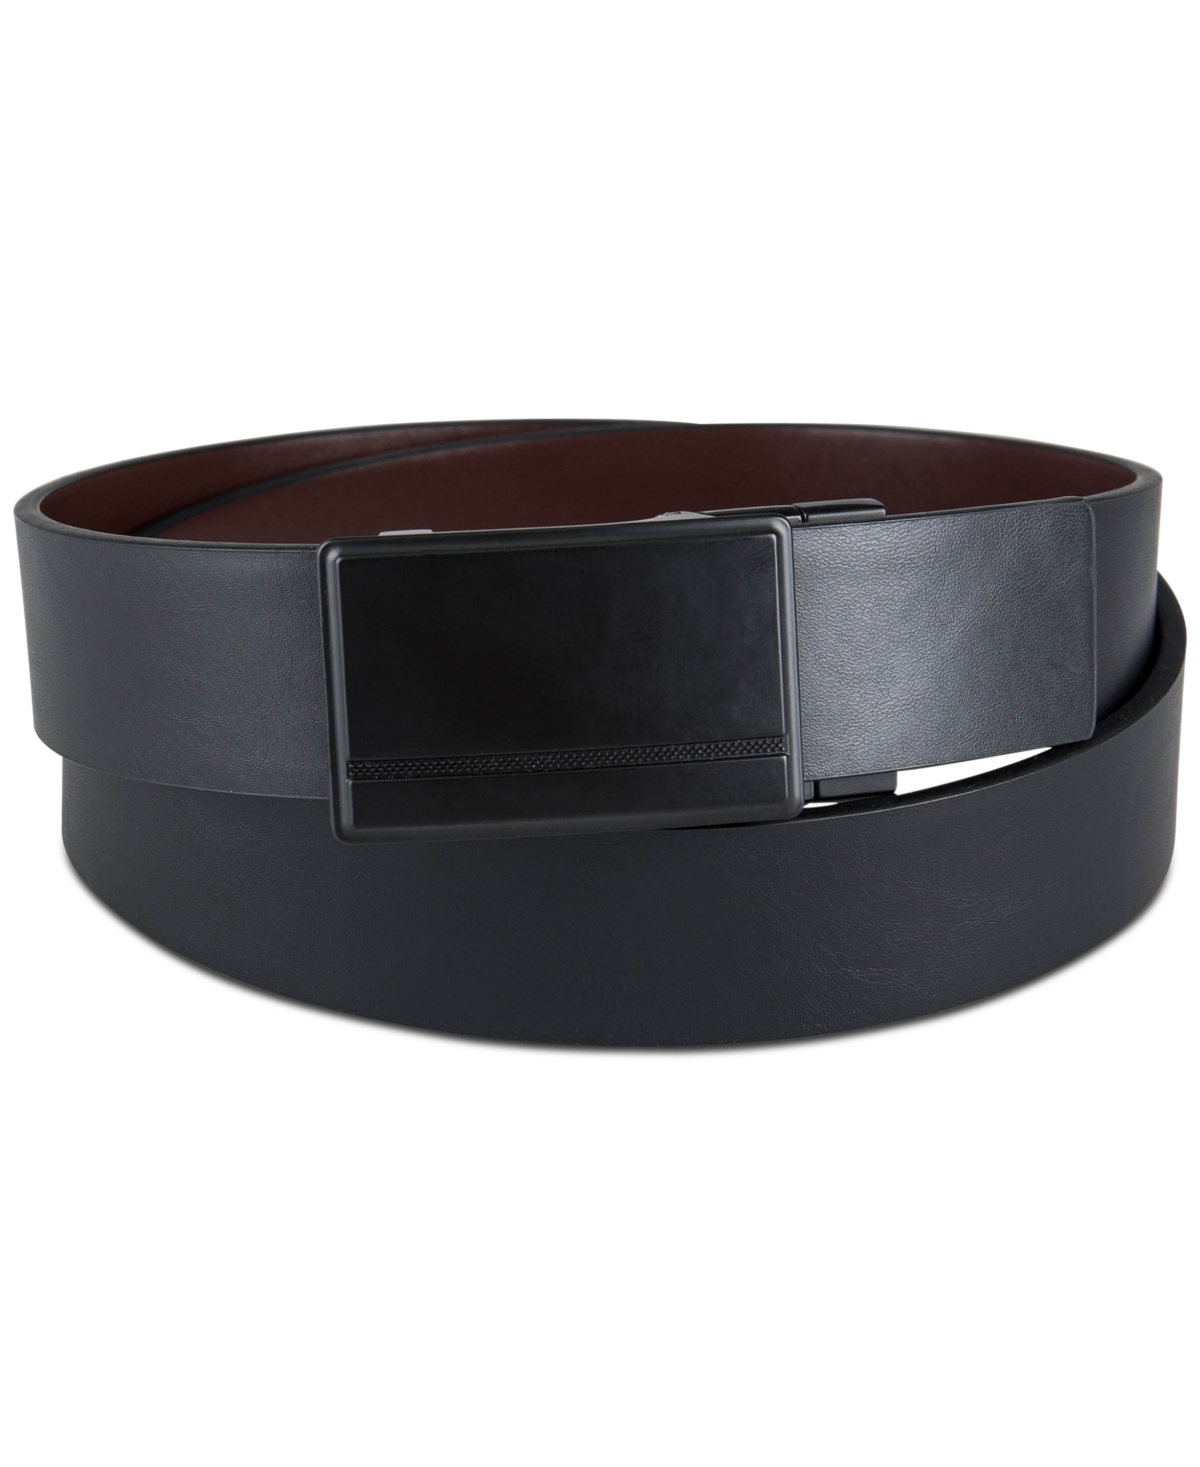 Men's Reversible Compression Buckle Belt, Created for Macy's - Black/Brown